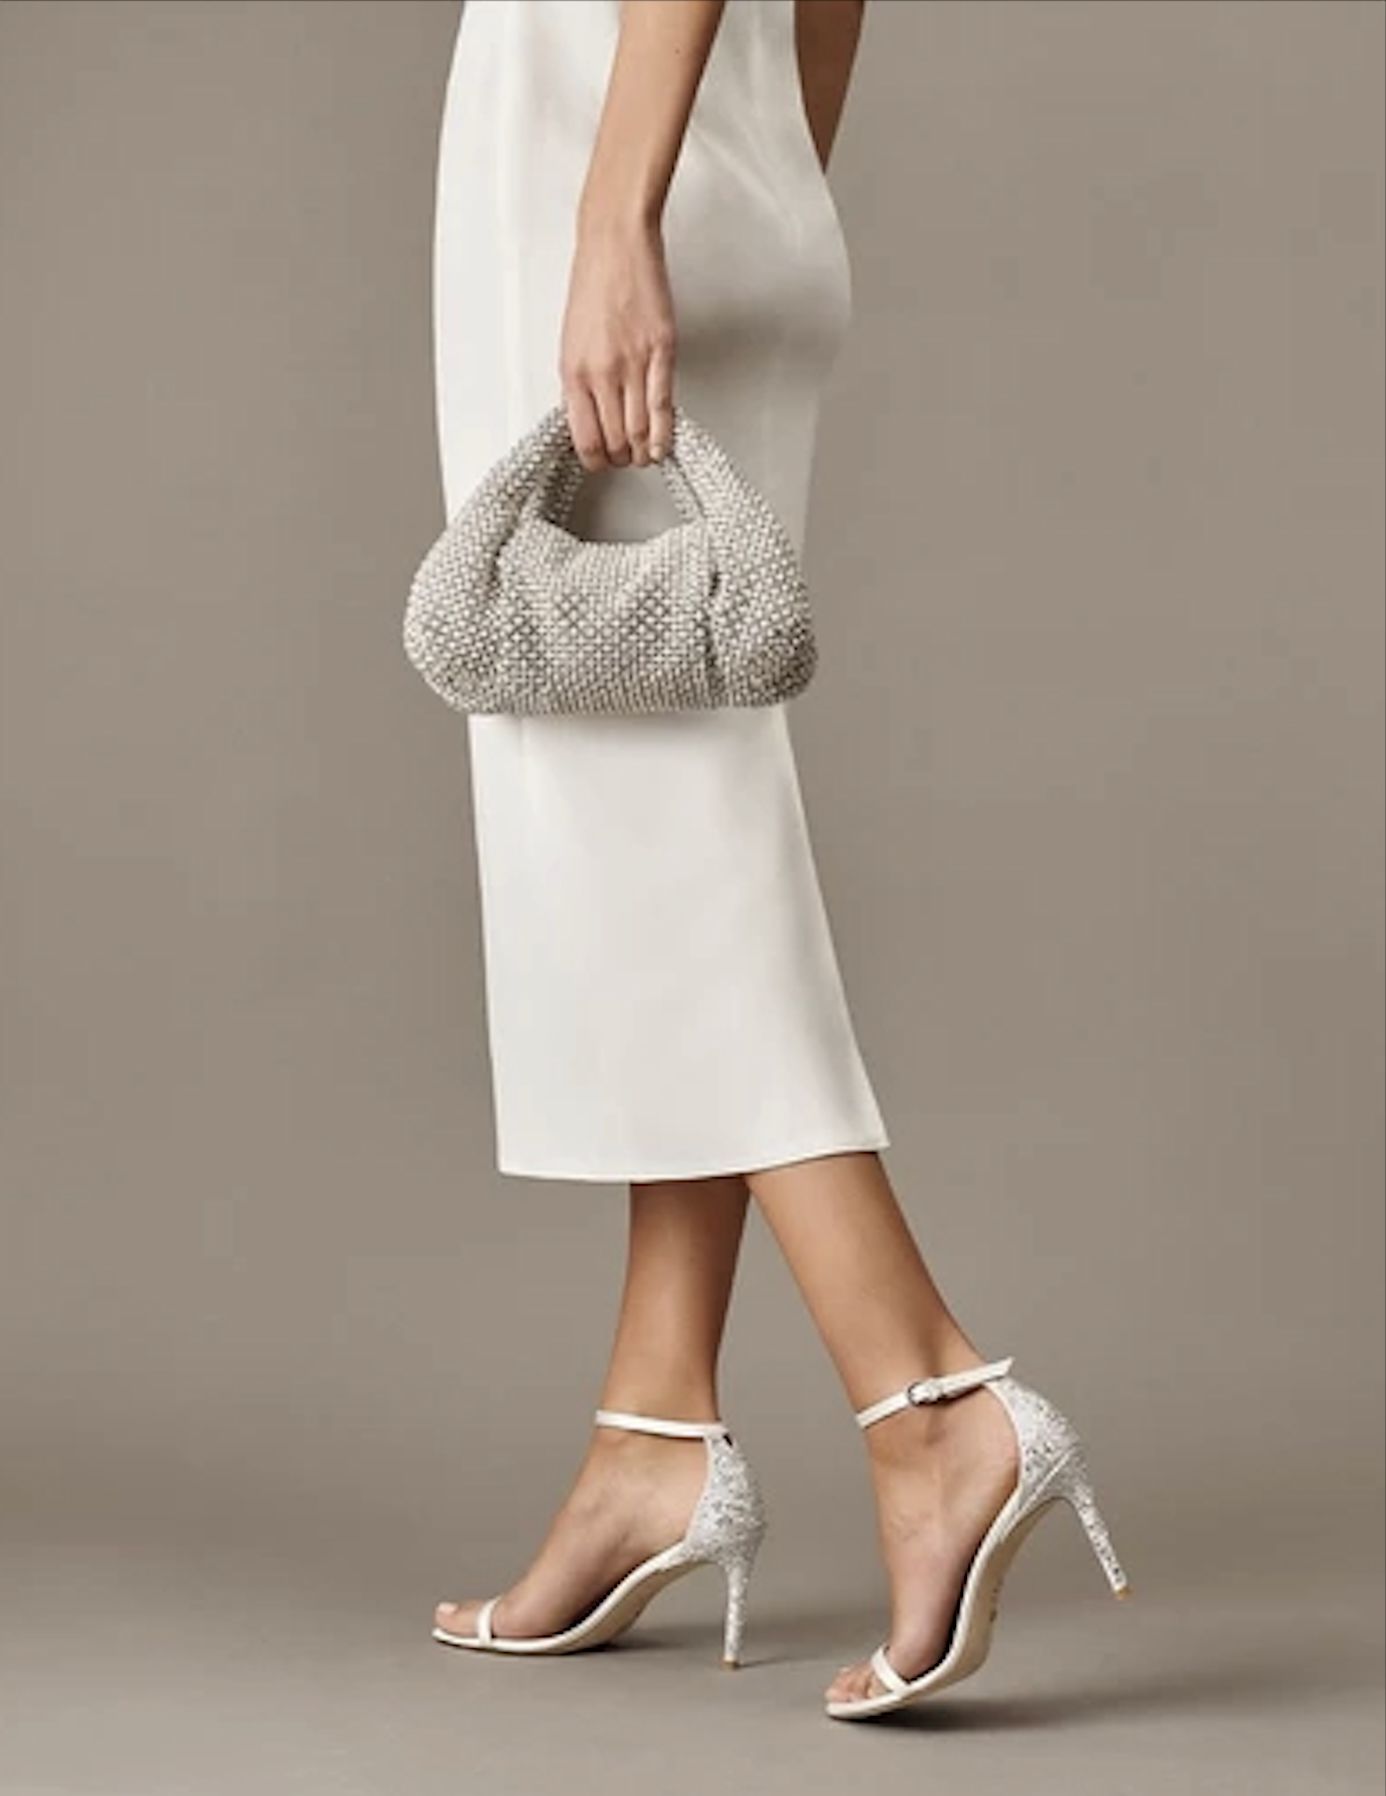 bottom half of a model wearing a white dress, white shoes, and silver mini bag